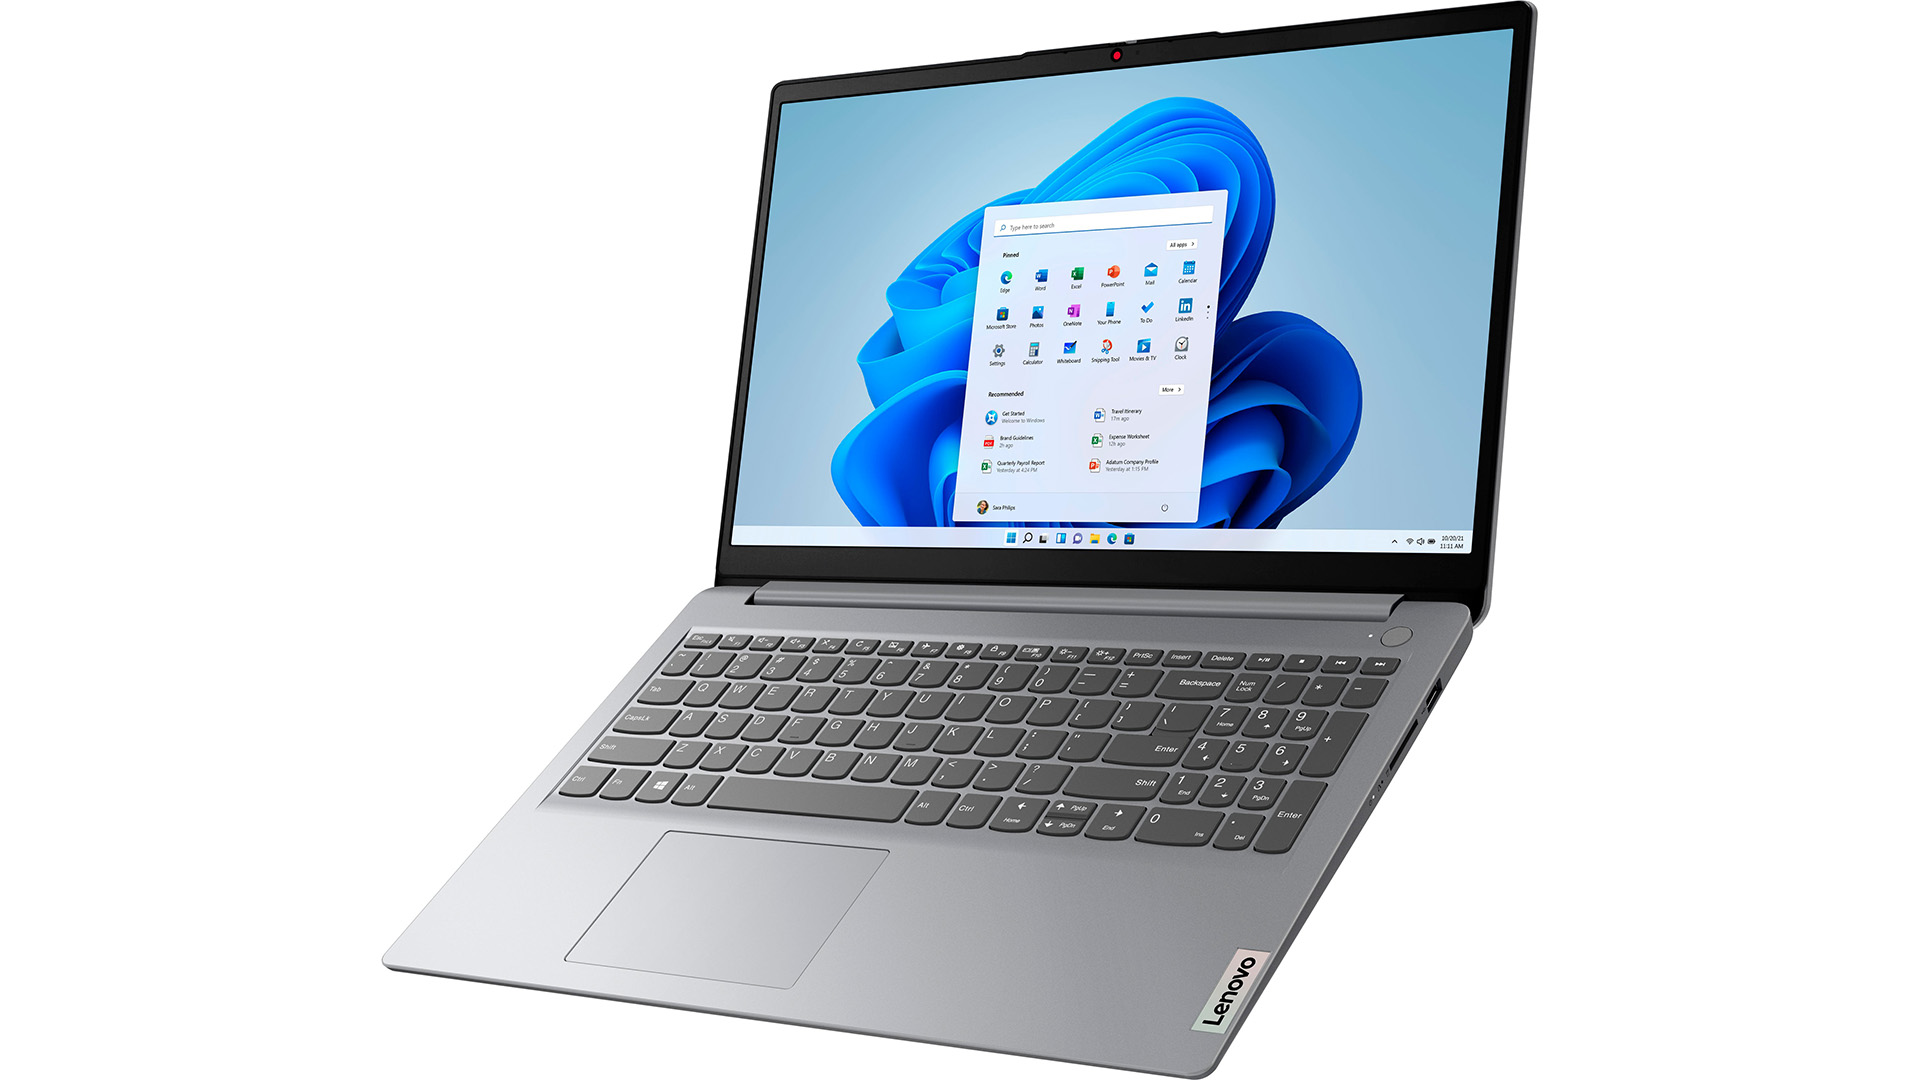 Save $250 on this Lenovo Ideapad laptop computer, down to only $529 at Finest Purchase